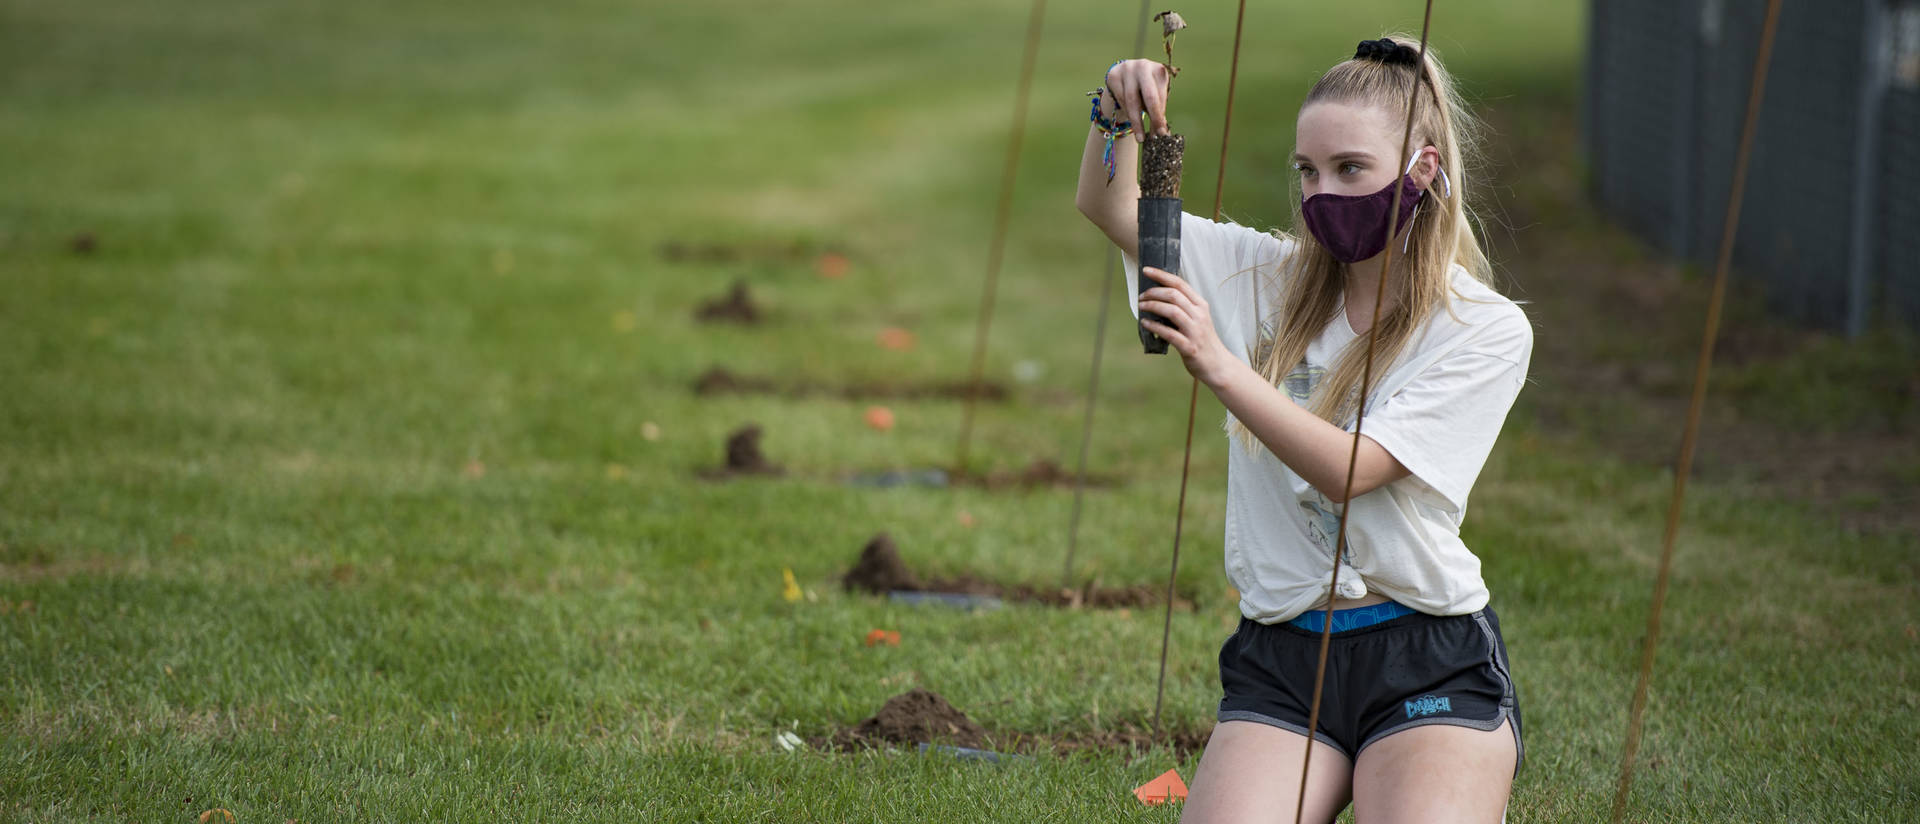 UW-Eau Claire biology student Cassidy Michels helped plant poplar trees Sept. 25 at Bollinger Fields as part of a National Science Foundation-supported research program studying the adaptiveness of tree species in varied climates.